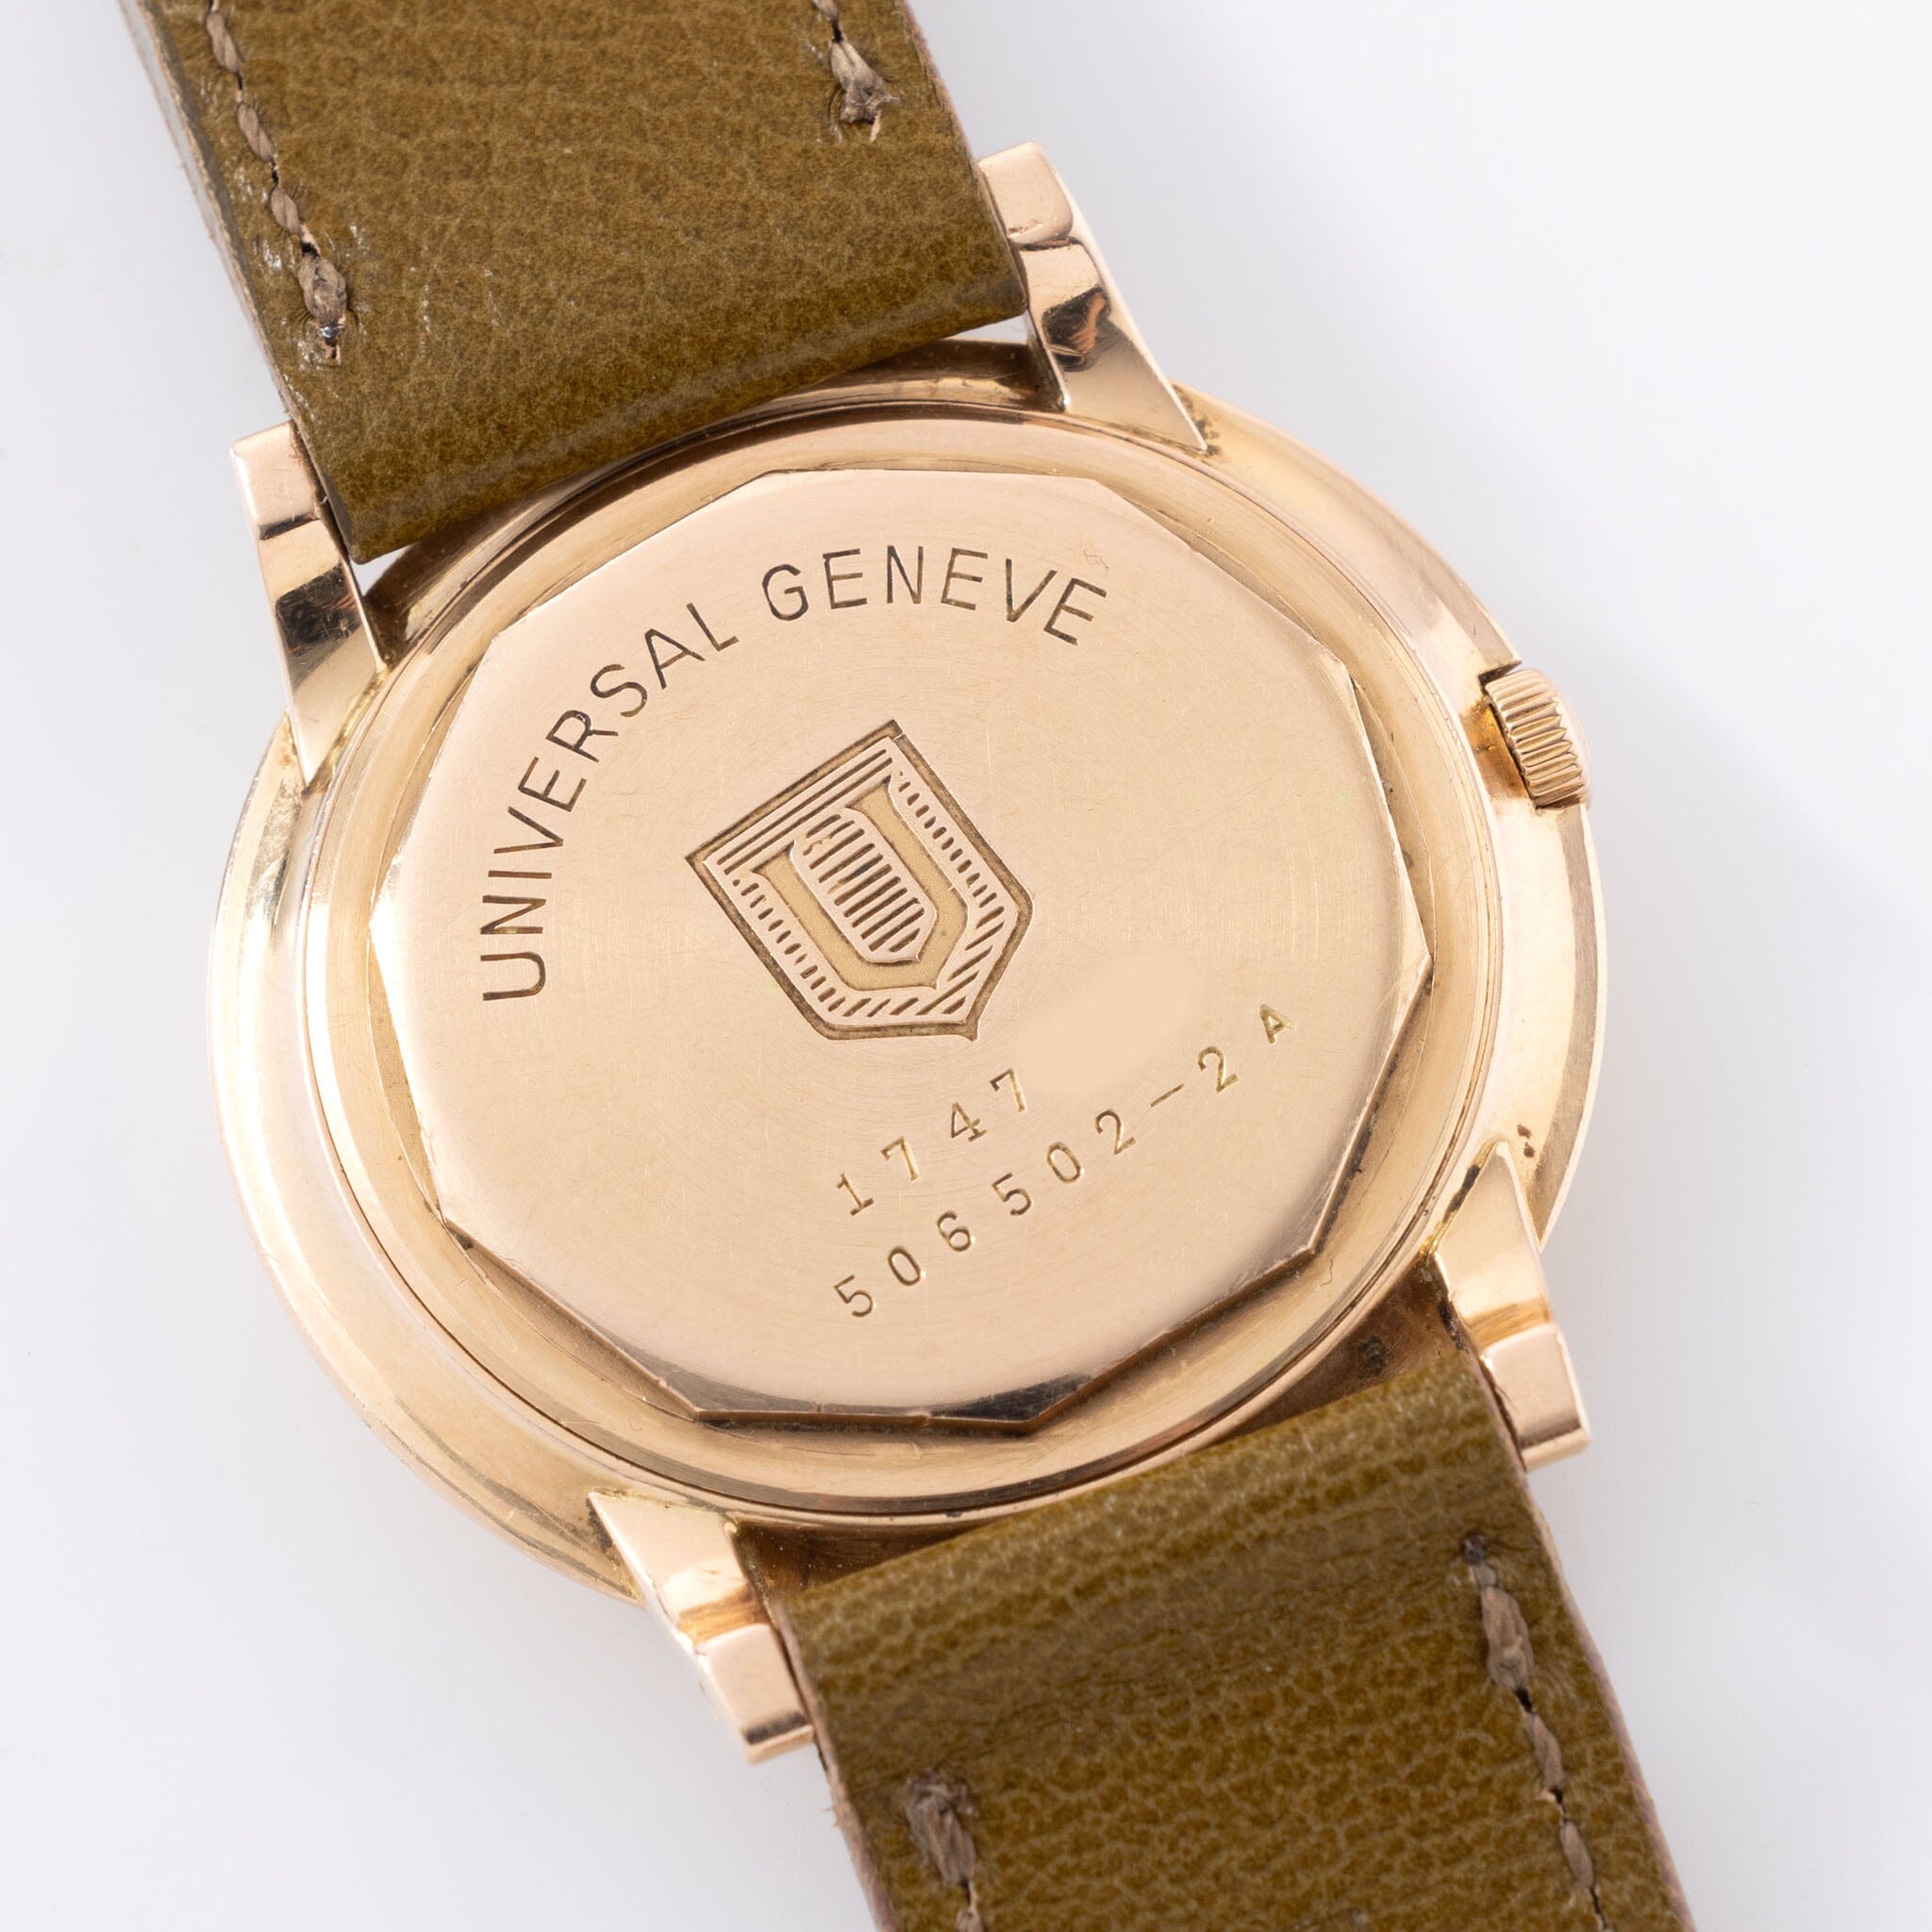 Universal Genève Saudi Armed Forces Dial 14kt Red Gold ref 506502-2a